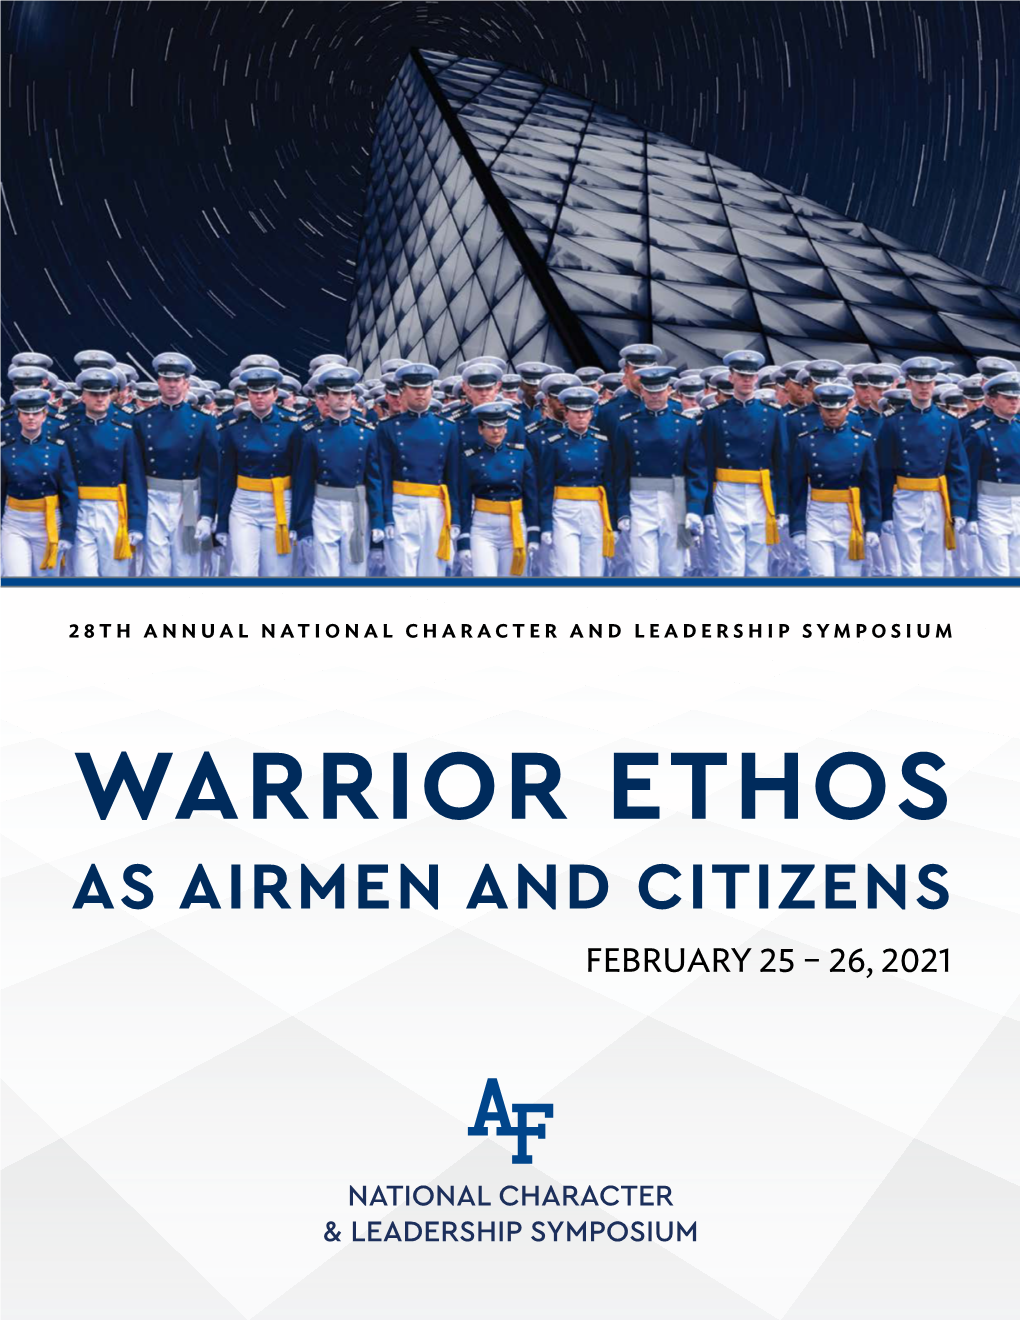 Warrior Ethos As Airmen and Citizens February 25 – 26, 2021